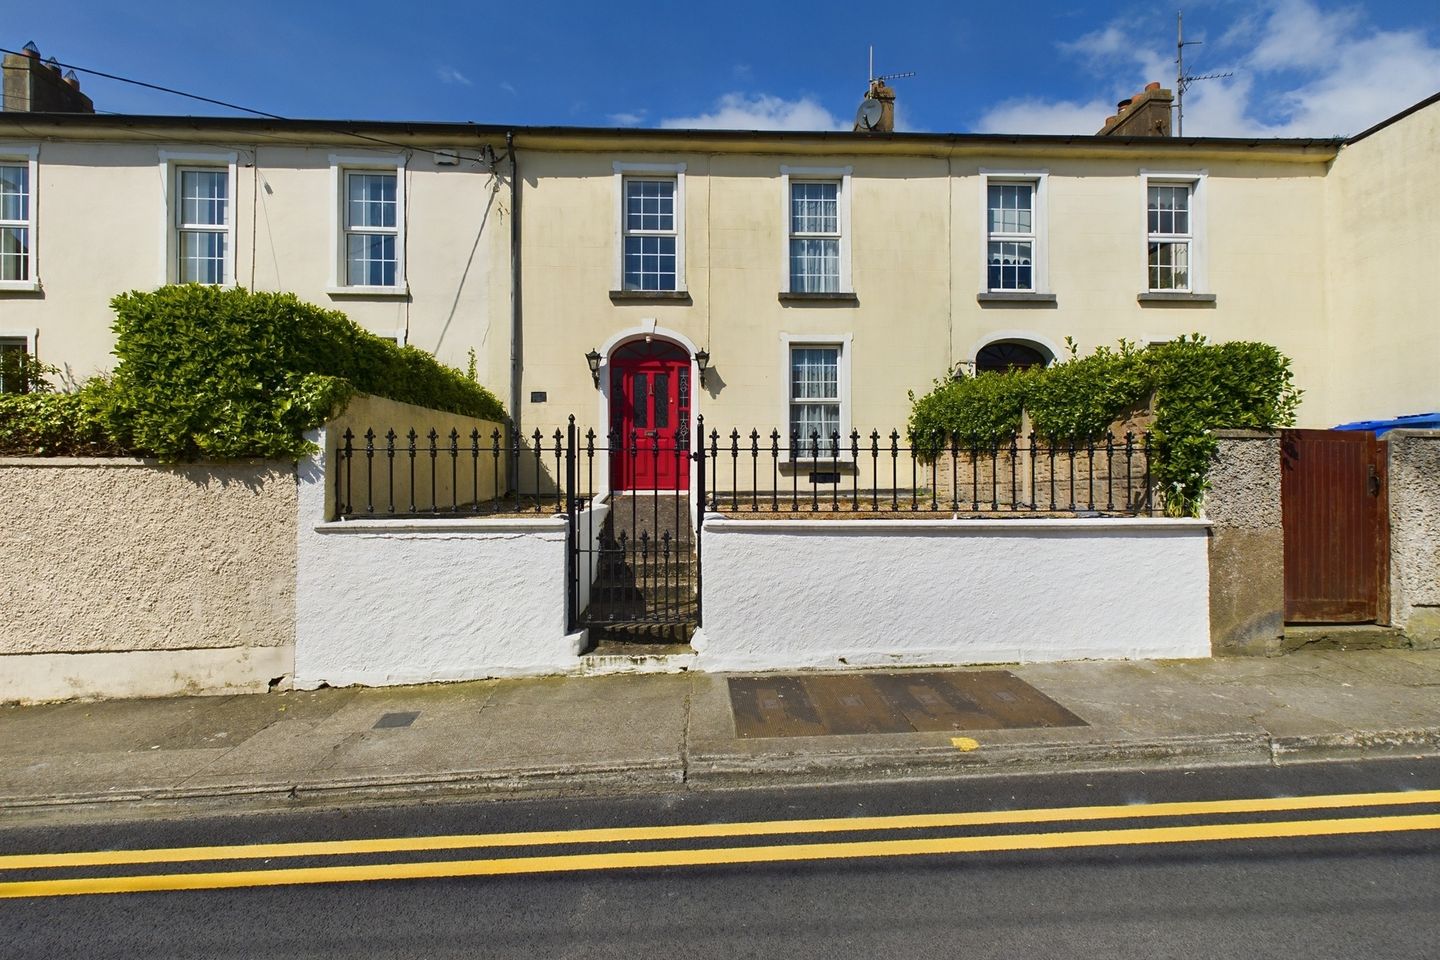 23 Queen's Street, Tramore, Co. Waterford, X91VK84